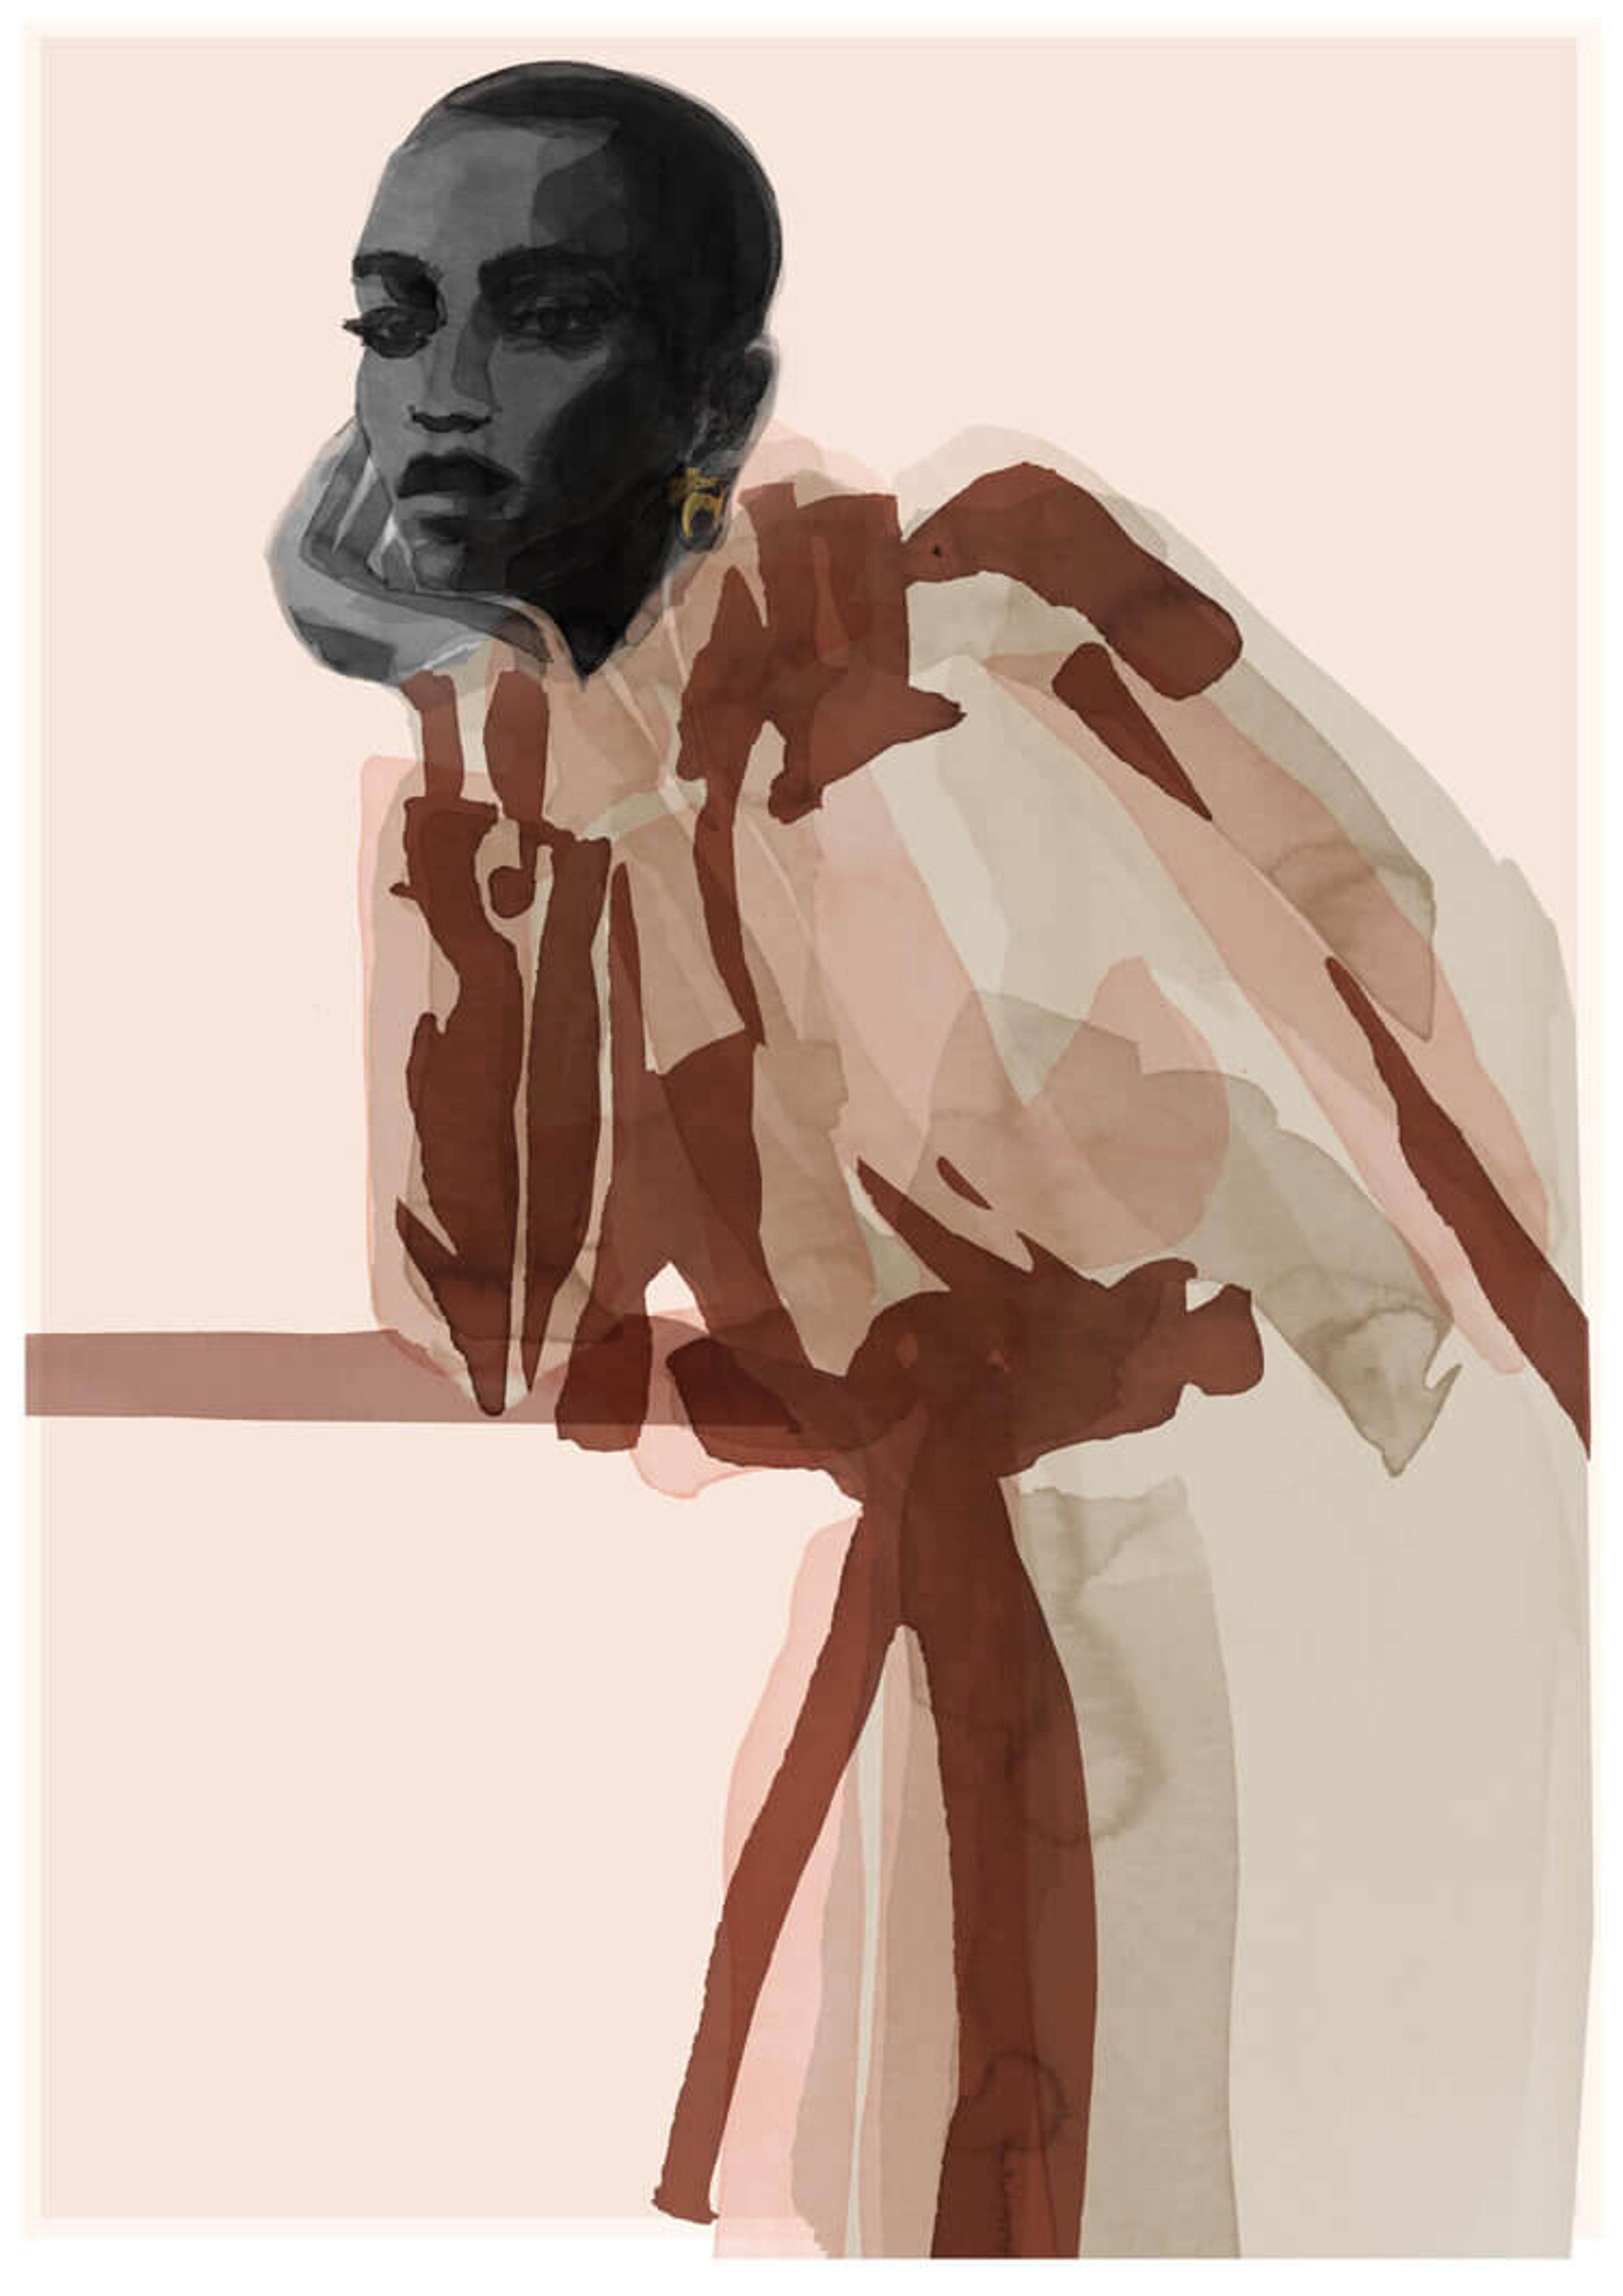 Watercolour illustration of a figure wearing a trench coat.